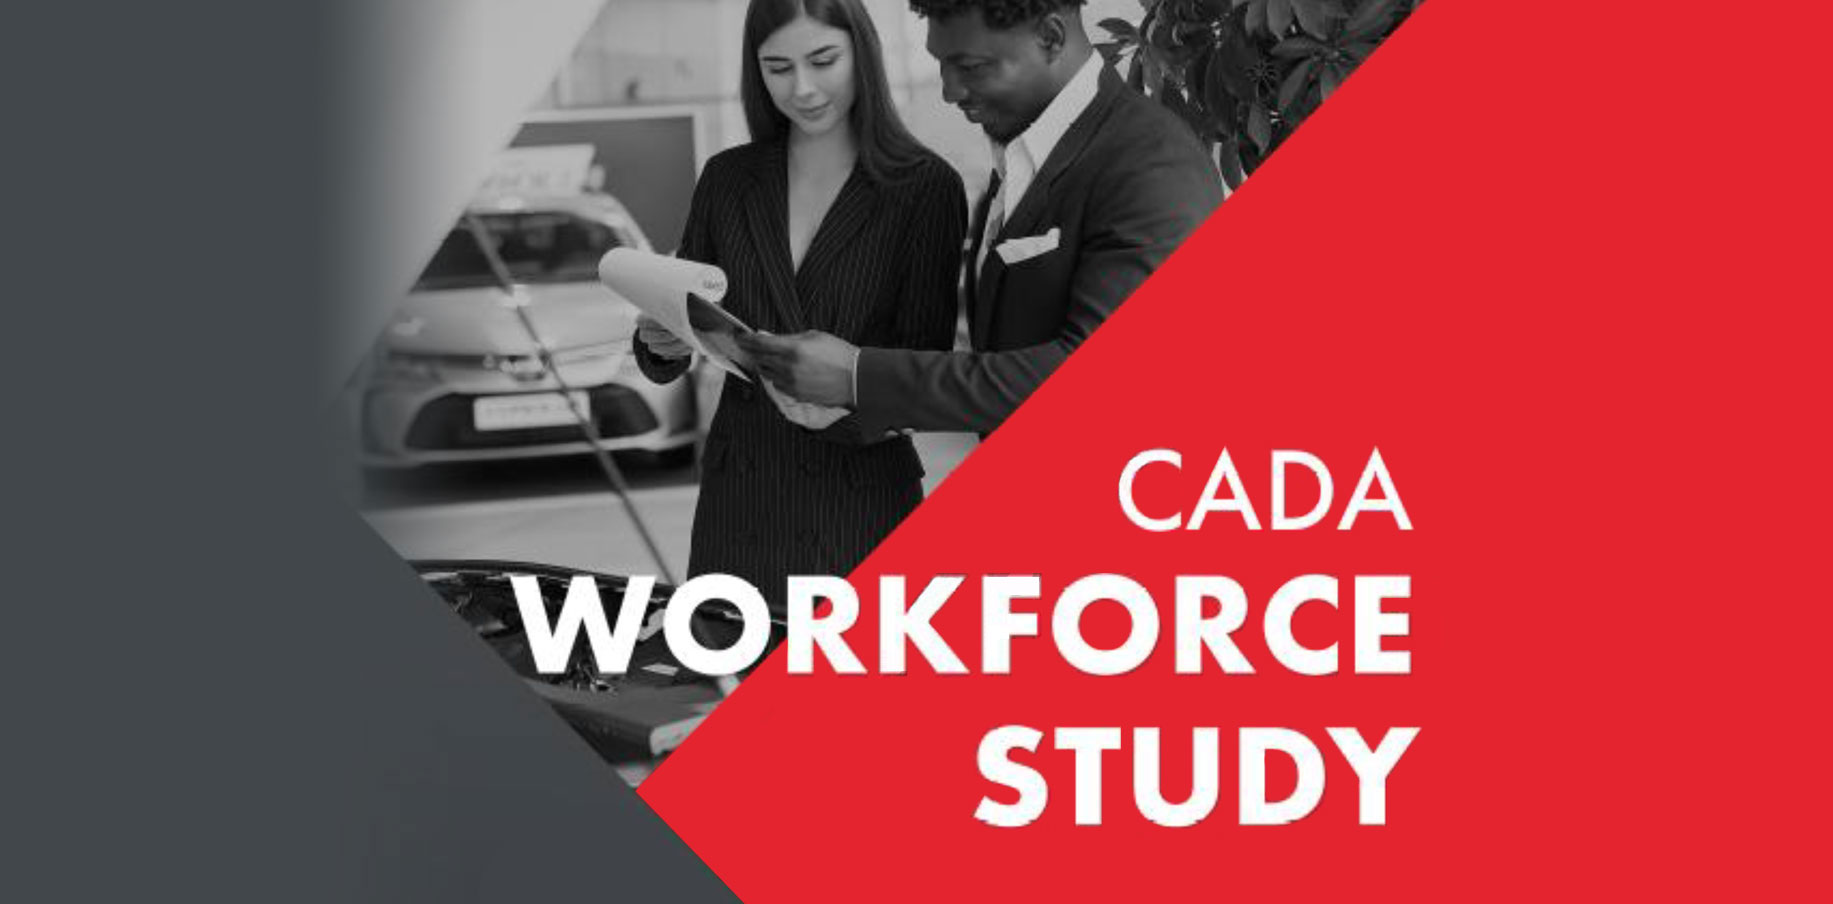 CADA to conduct second Workforce Study